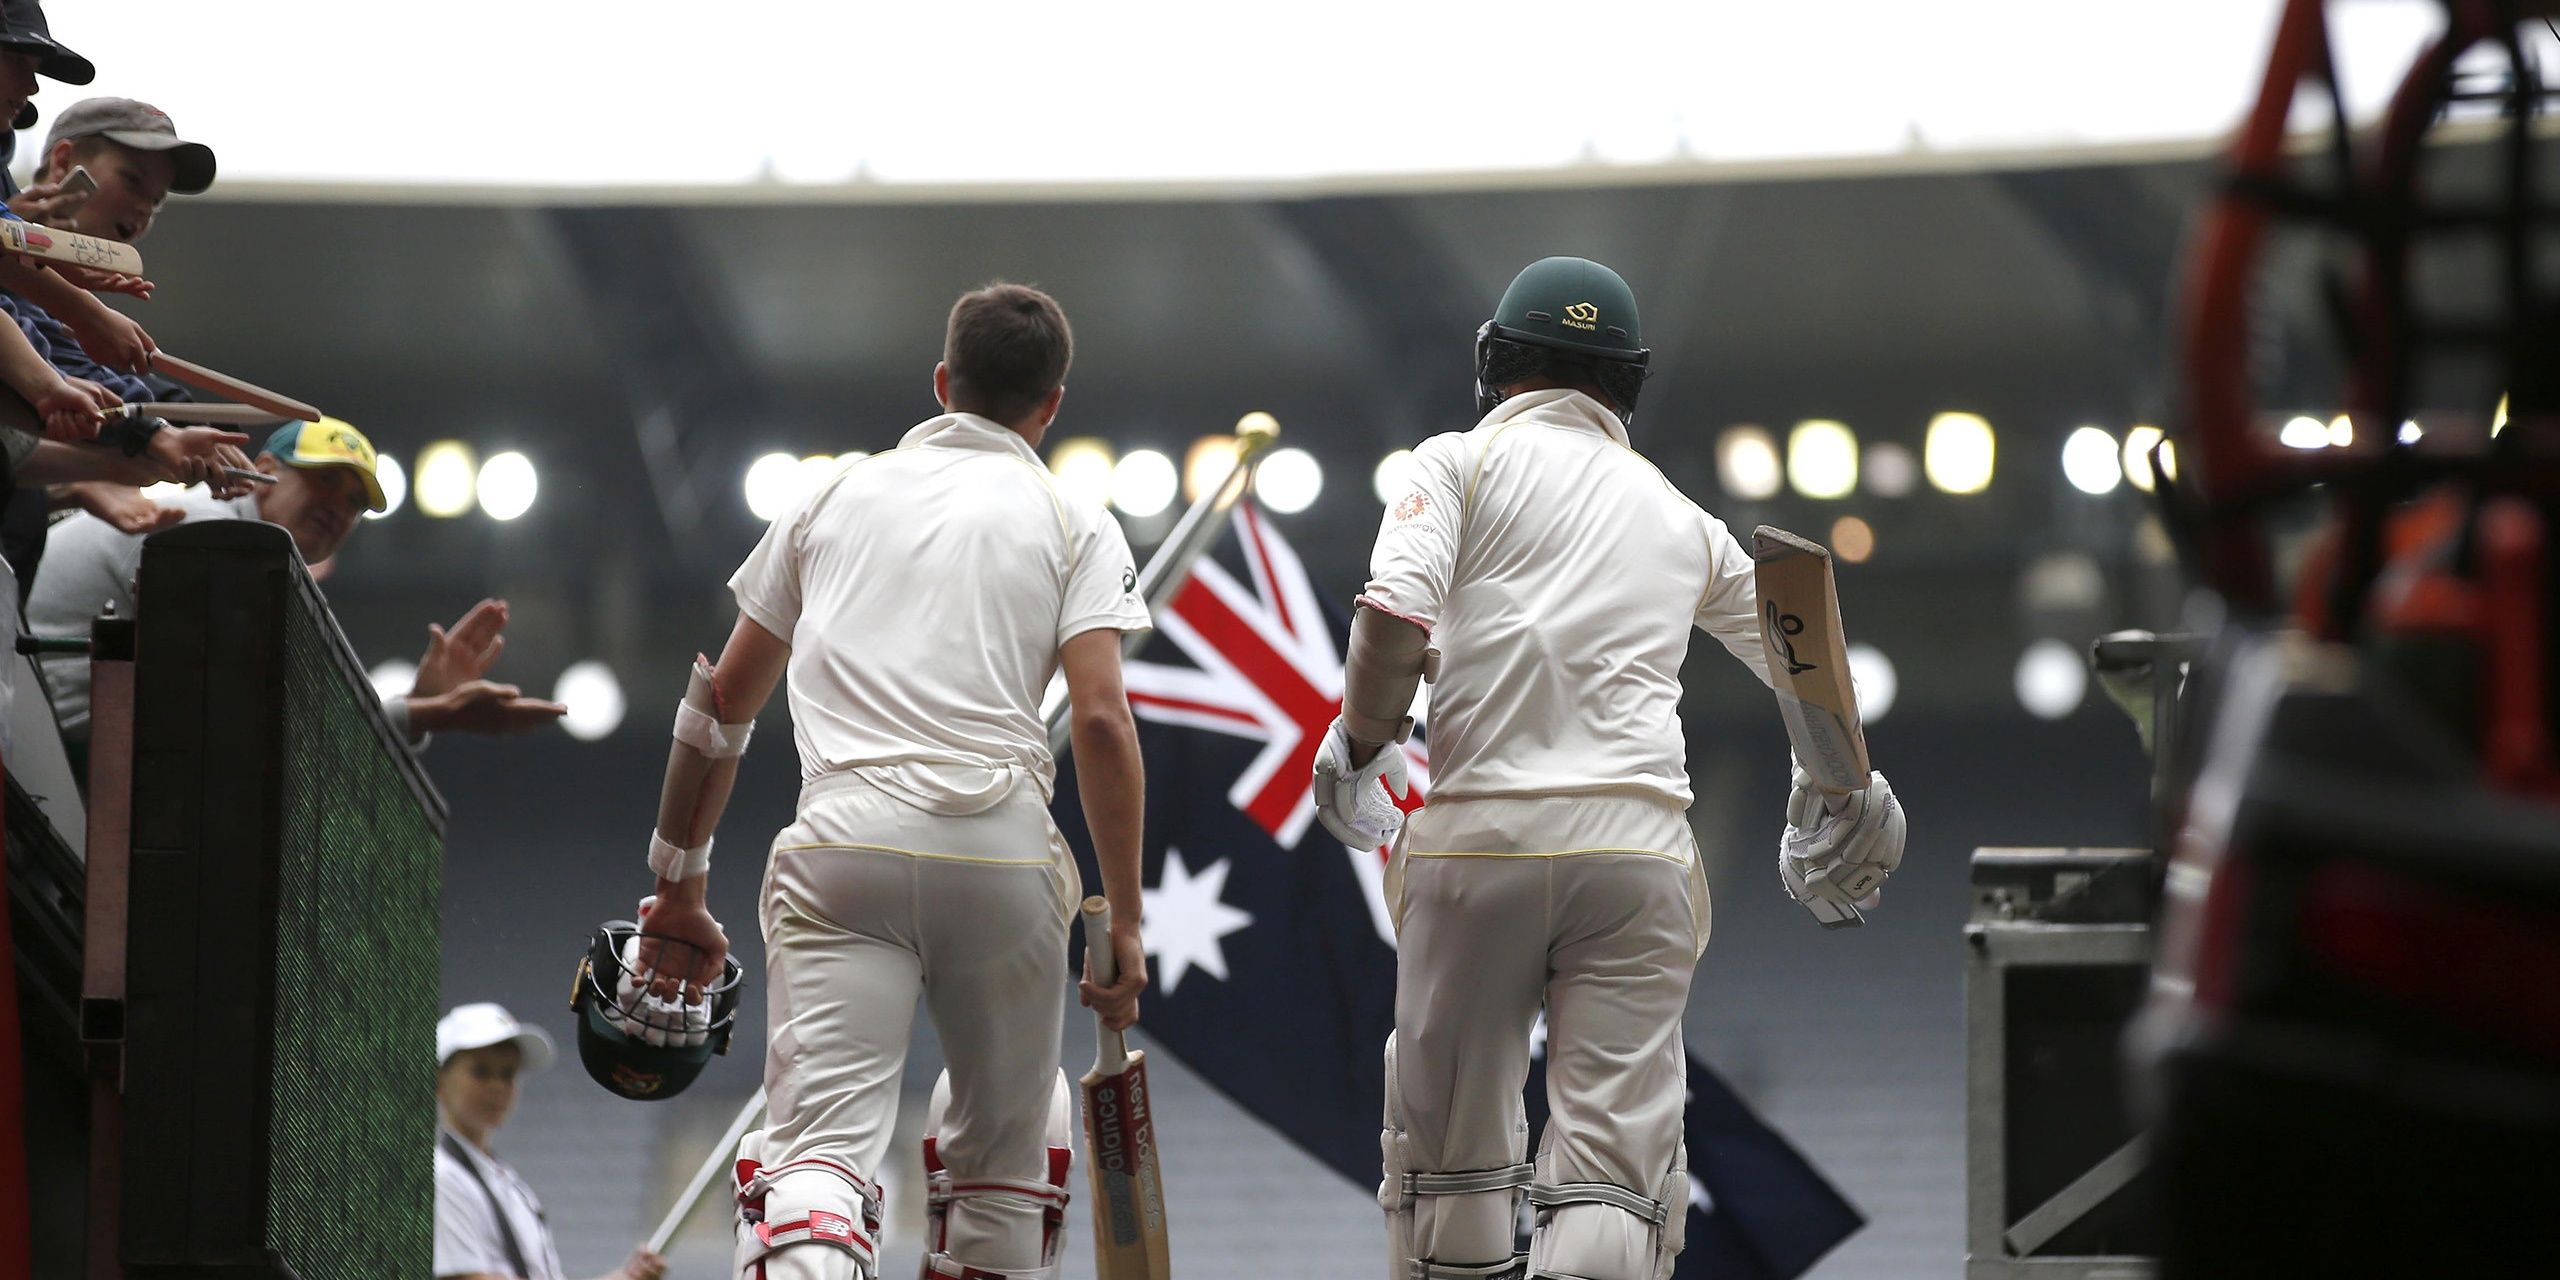 Members of Australia's cricket team walk to the field in The Test: A New Era for Australia’s Team